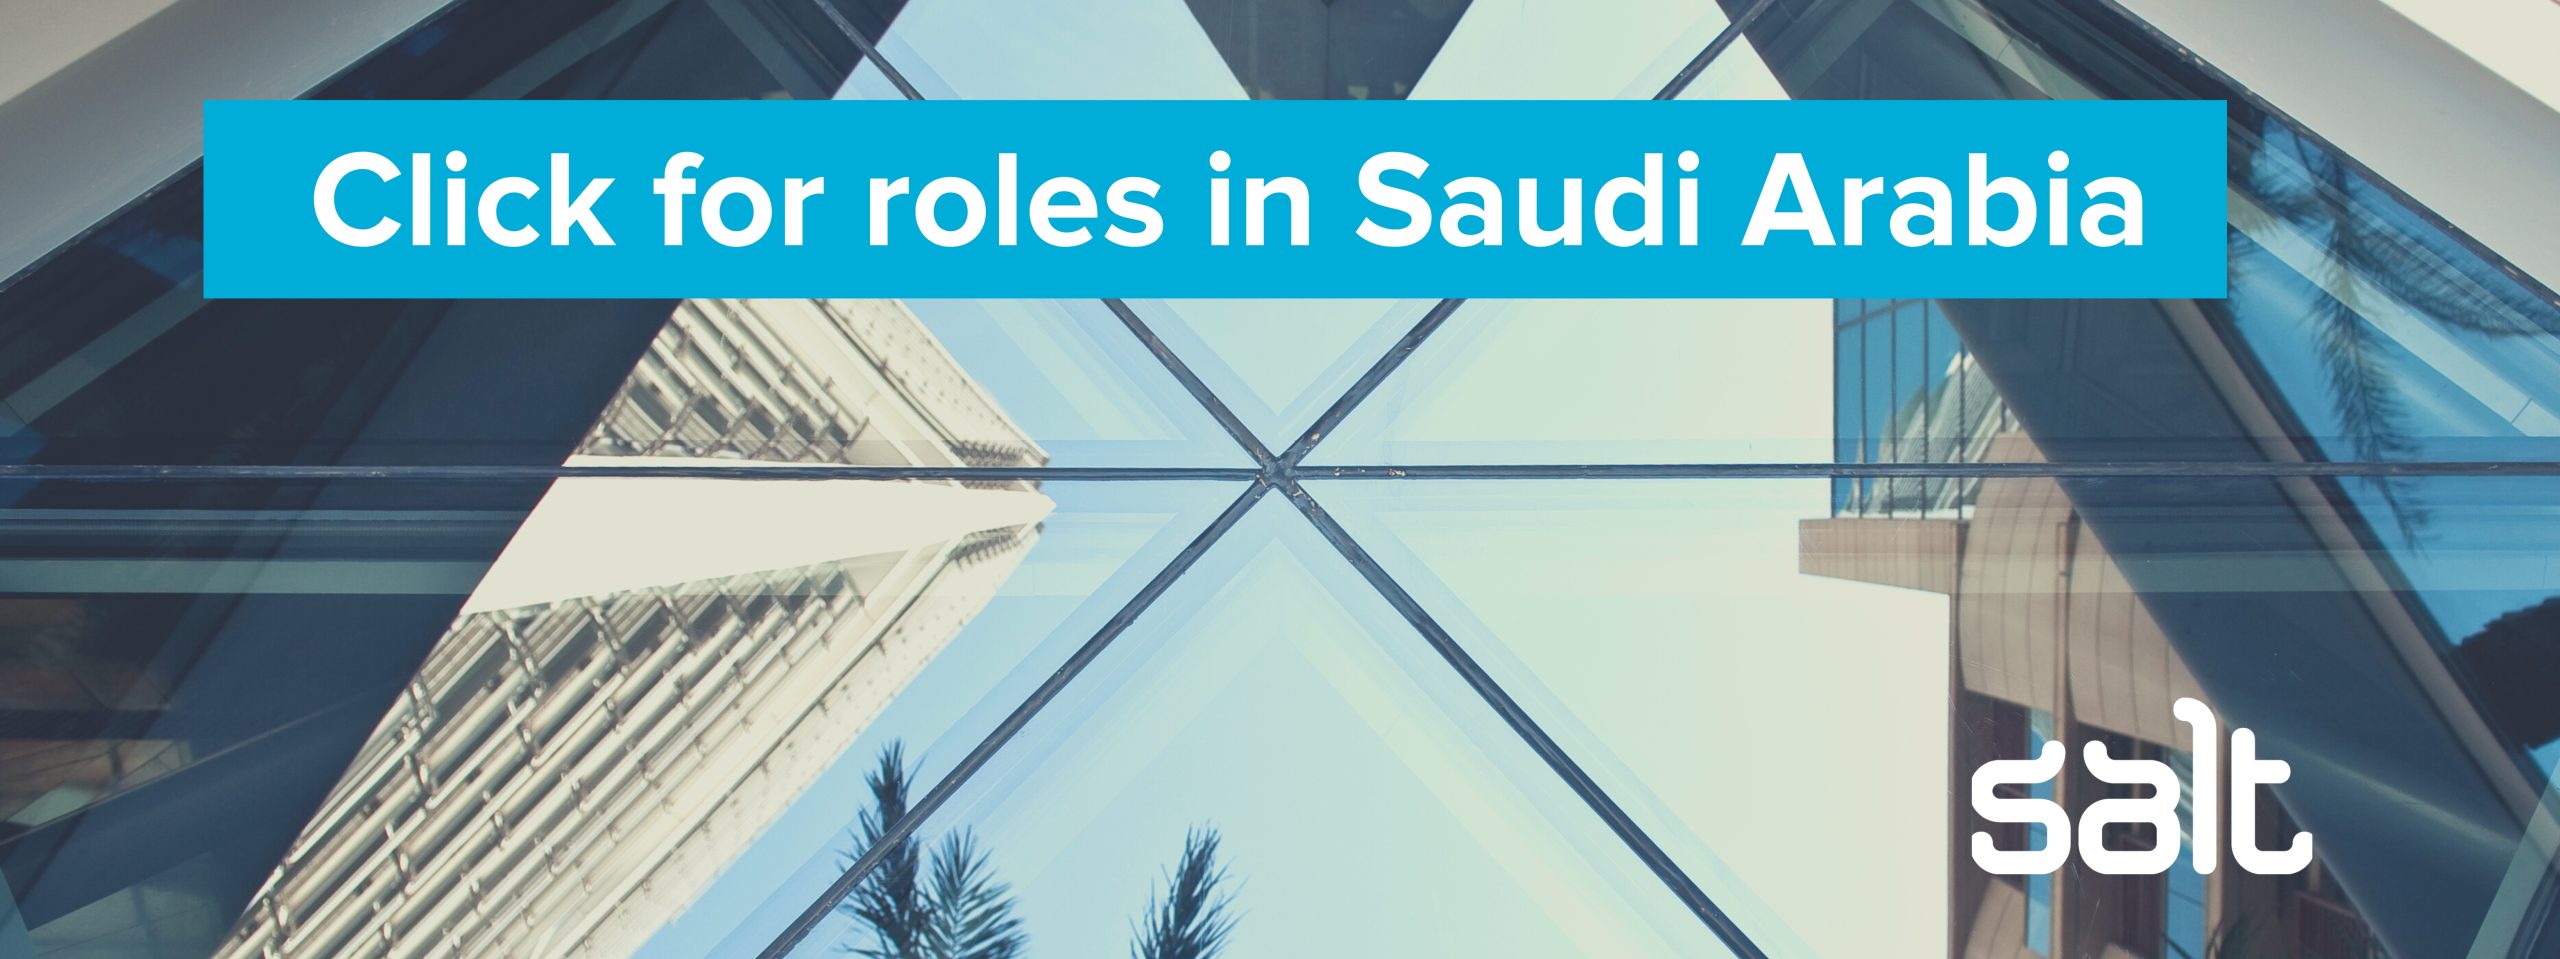 Click here to see open roles for Saudi Arabia to help you relocate